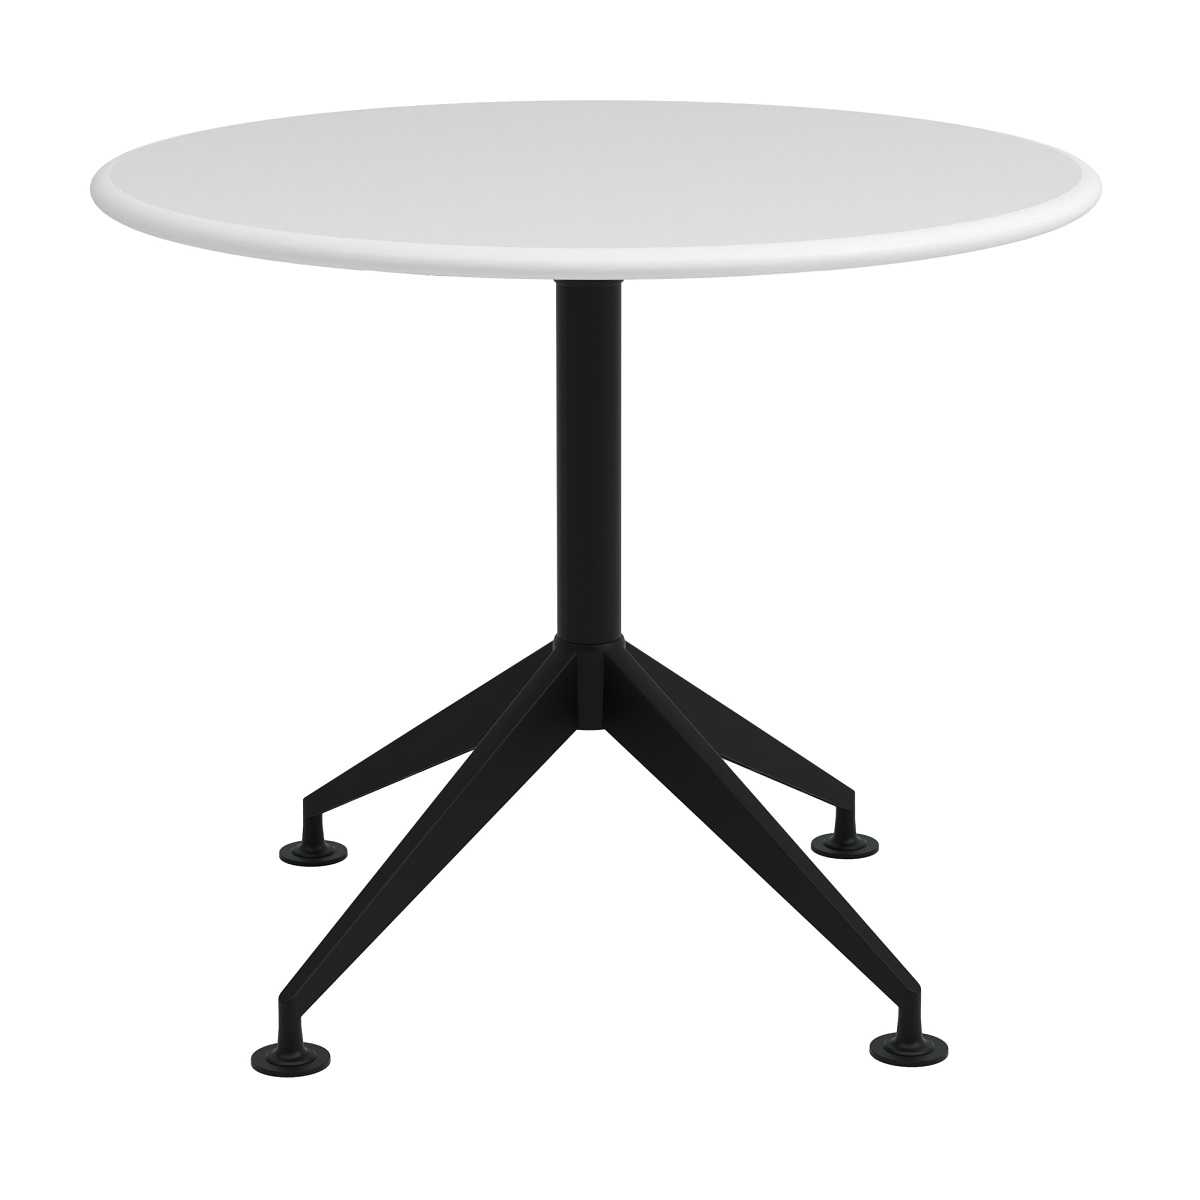 Marco Breakout Table Base Wide Stance